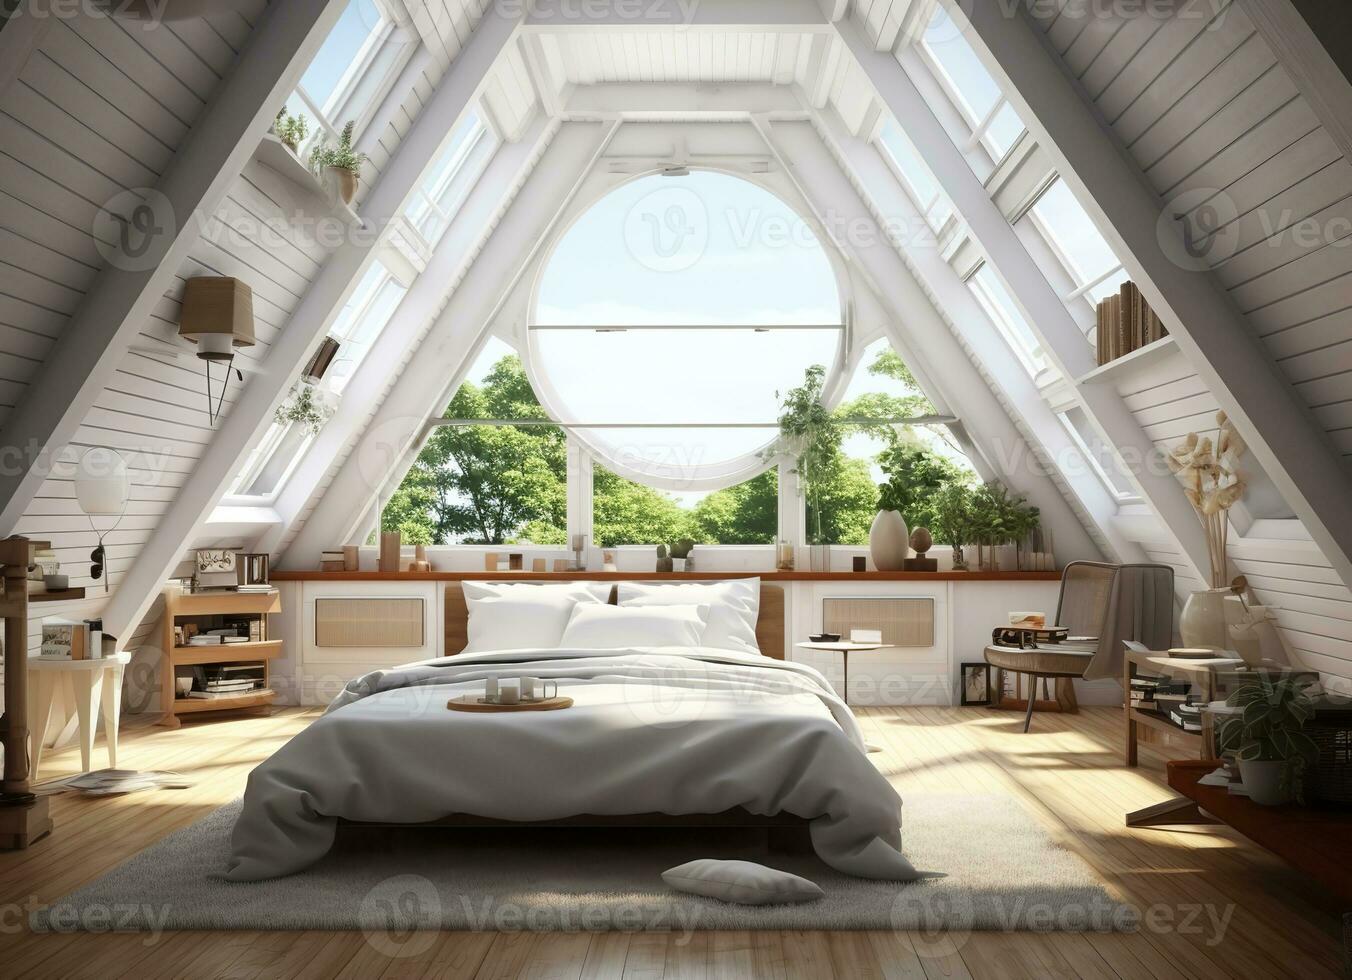 AI generated Cozy attic bedroom with a large round window offering a view of the trees outside. The bed is made and there is a rug on the floor, adding to the warm and inviting atmosphere of the room photo